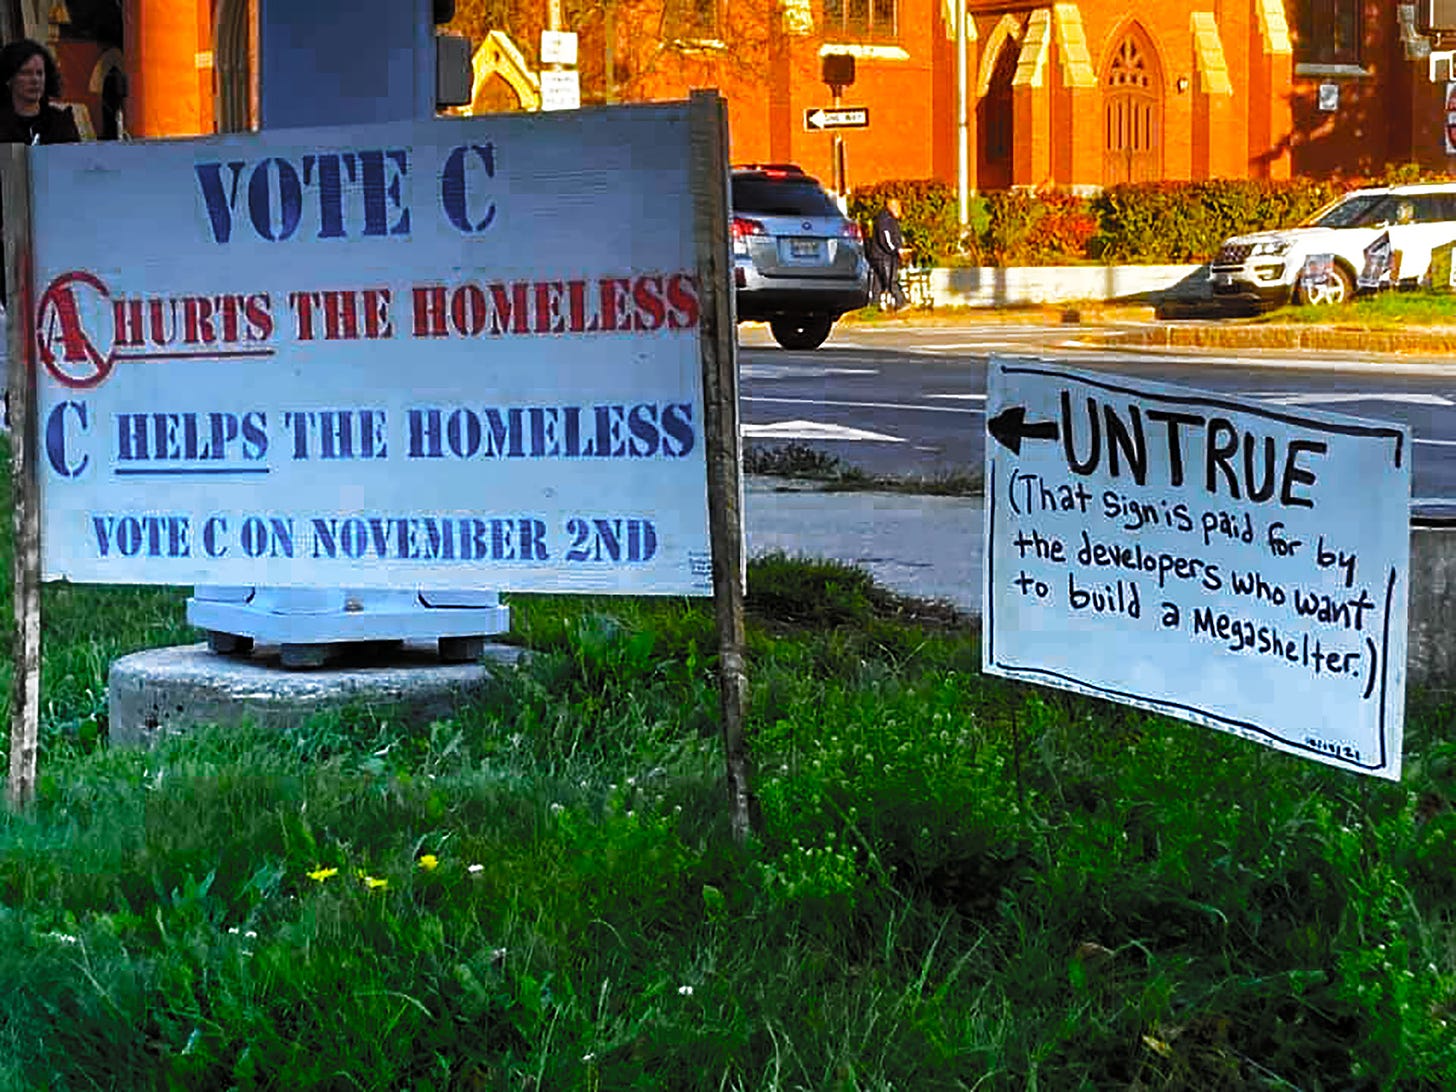 Large Sign says Vote C to support the Homeless, Small hand Made sign next to it says Umtrue! That sign is paid for by developers who want to build a megashelter!